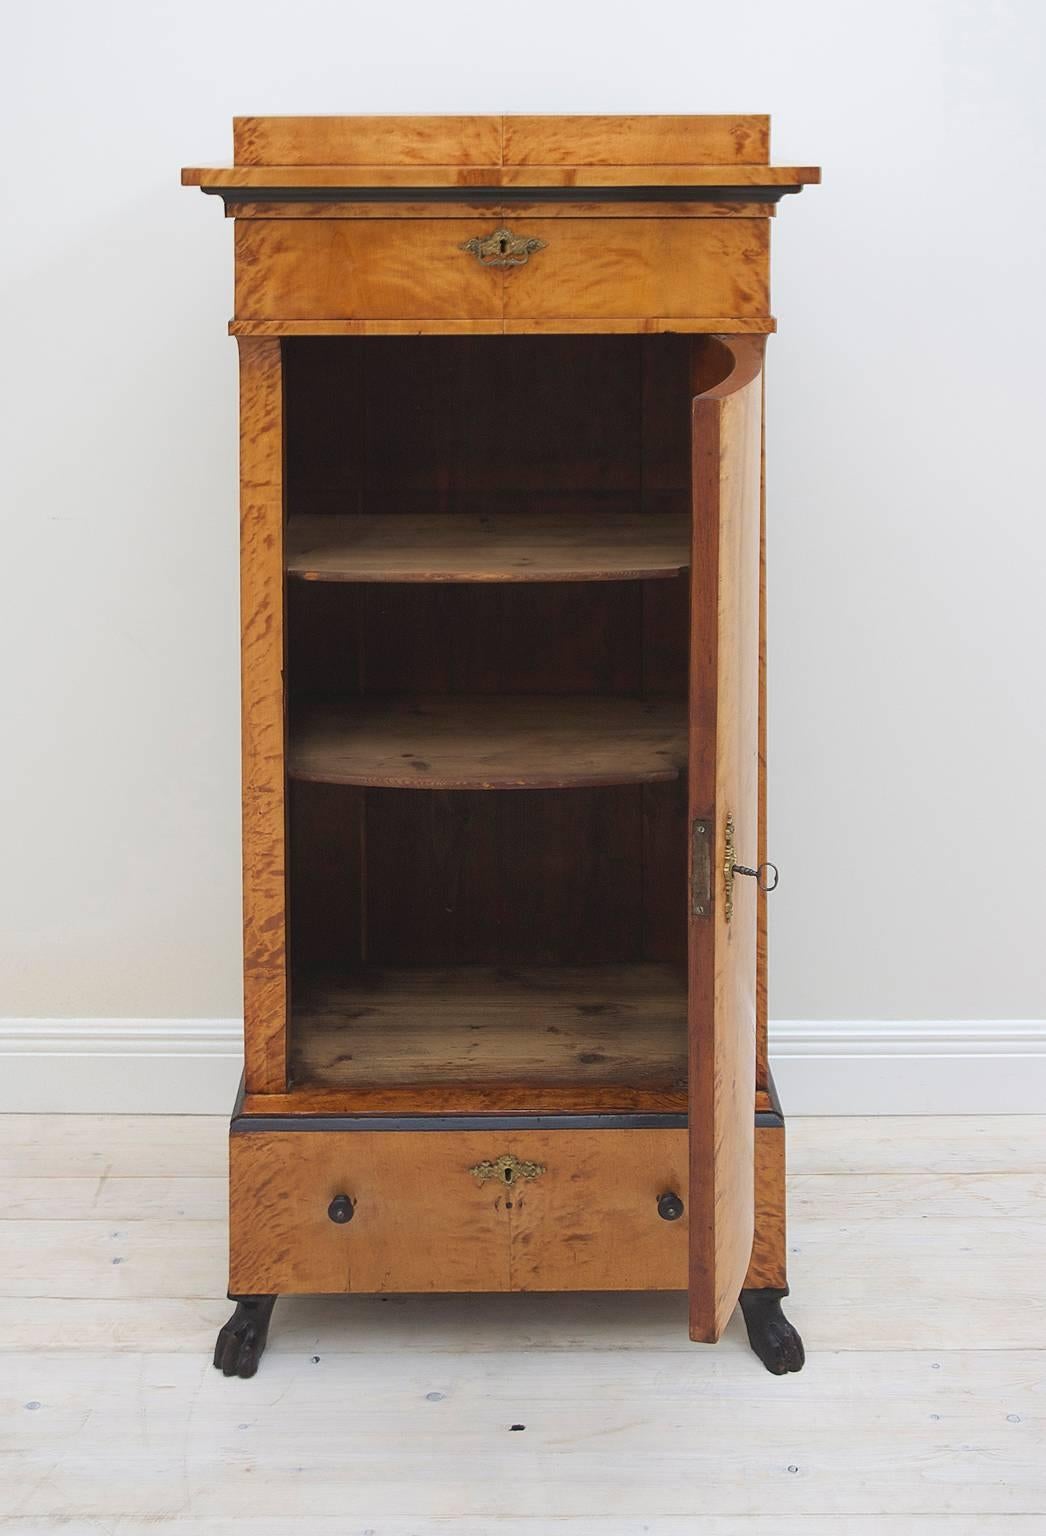 A Karl Johan Swedish Empire or early Biedermeier pedestal cabinet in birch offering two exterior drawers, one above and another below the central bowed door, with base resting on carved and ebonized lion's paw feet. Interior has three shelves,